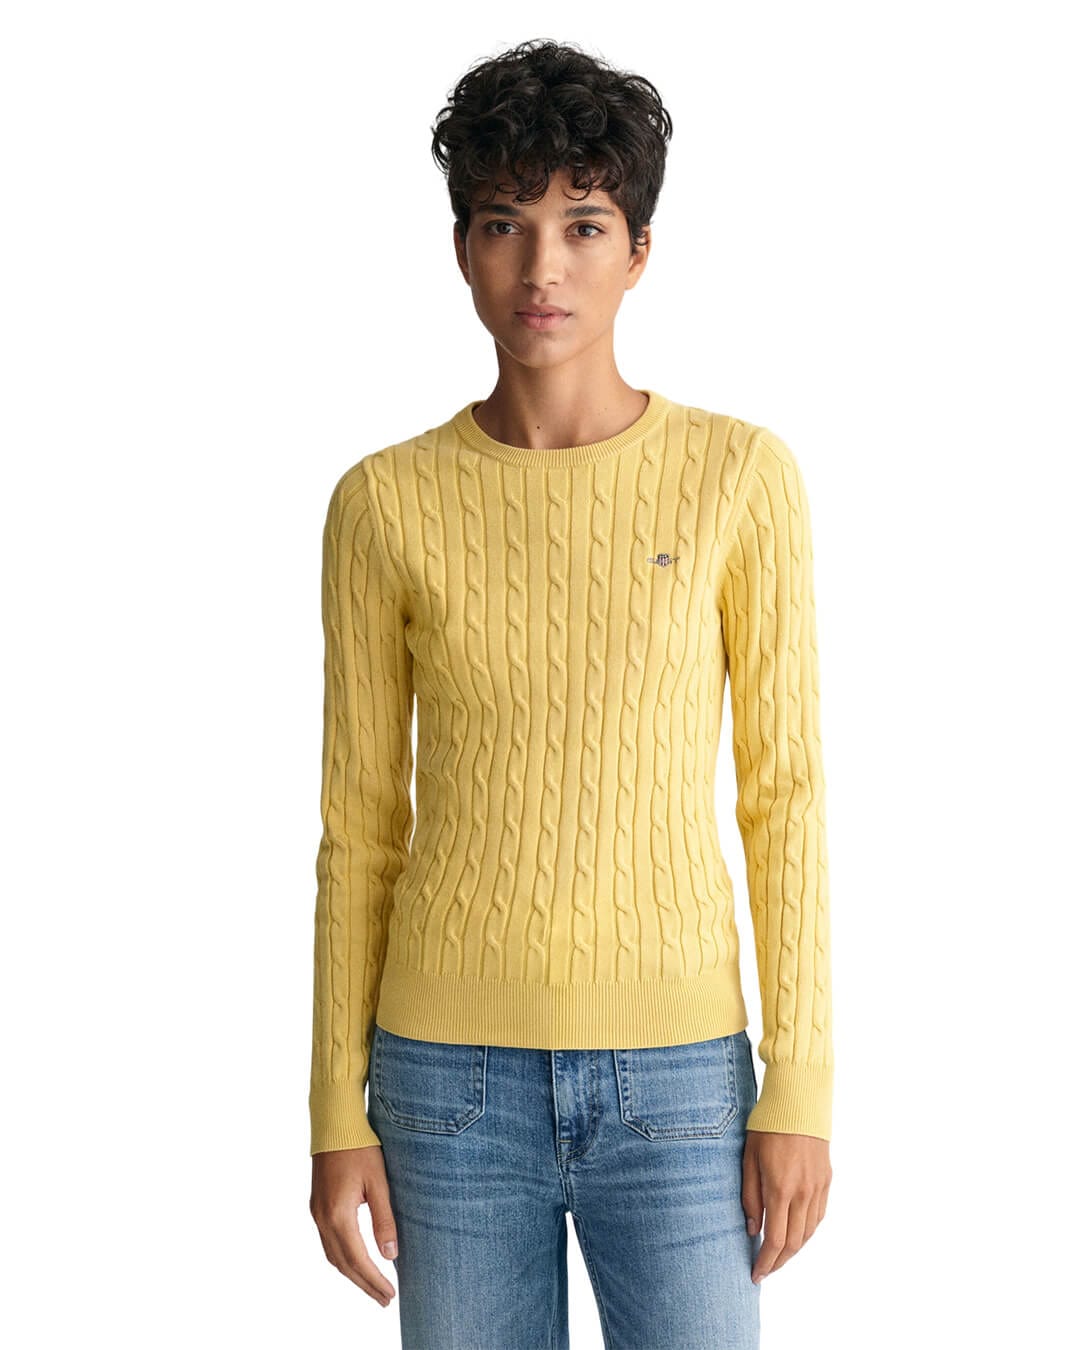 Gant Jumpers Gant Yellow Stretch Cotton Cable Knit Crew Neck Sweater